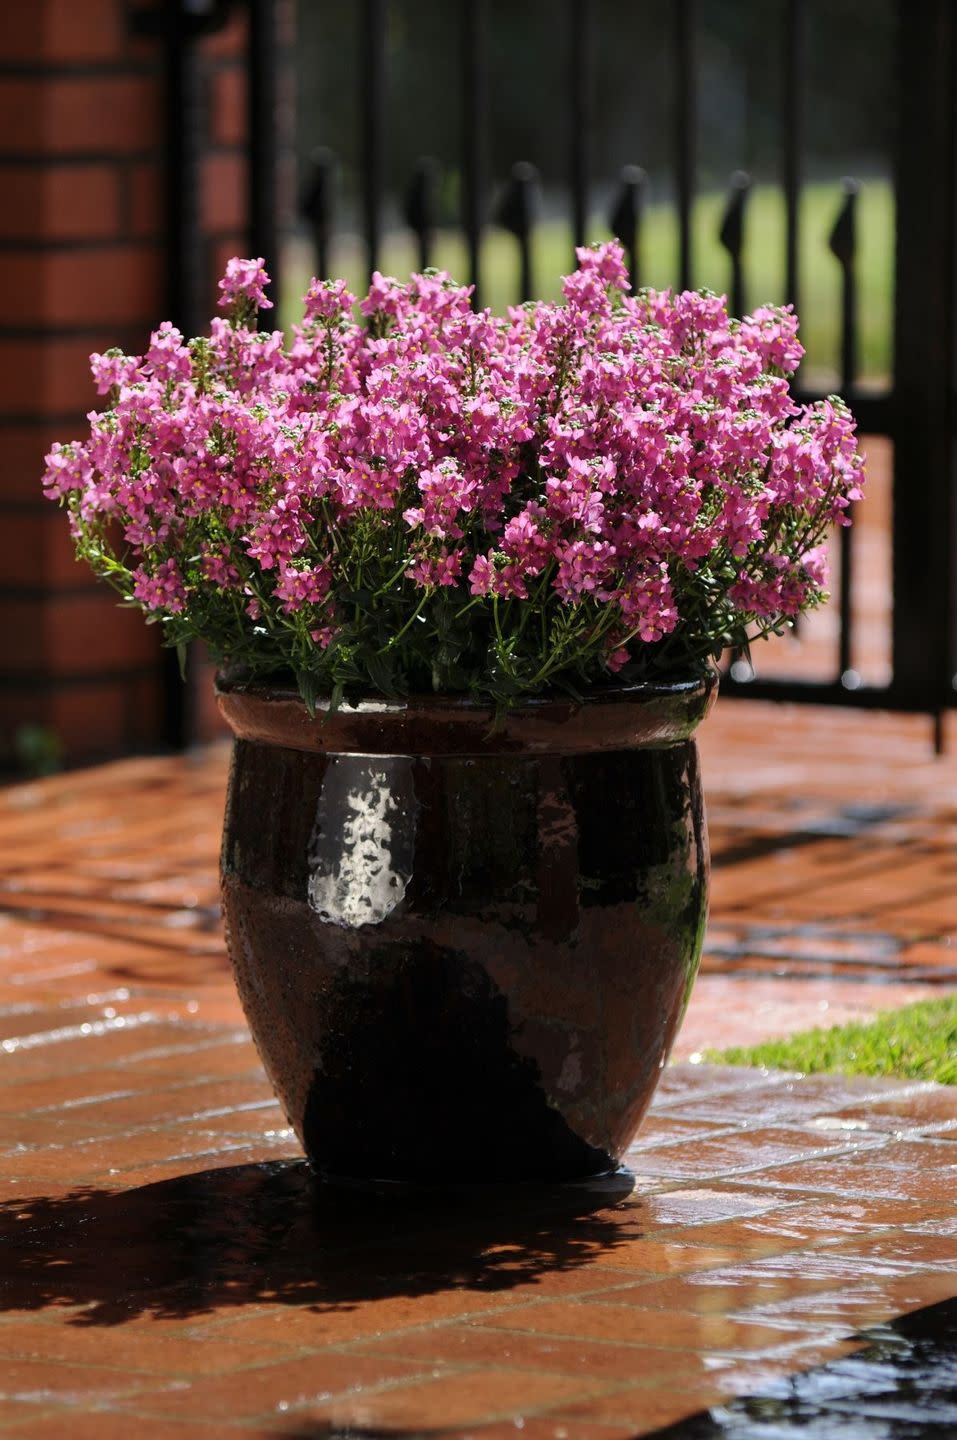 abundant purplish pink flowers blooming on a nemesia plant in a glazed pot on a brick patio with wrought iron gate